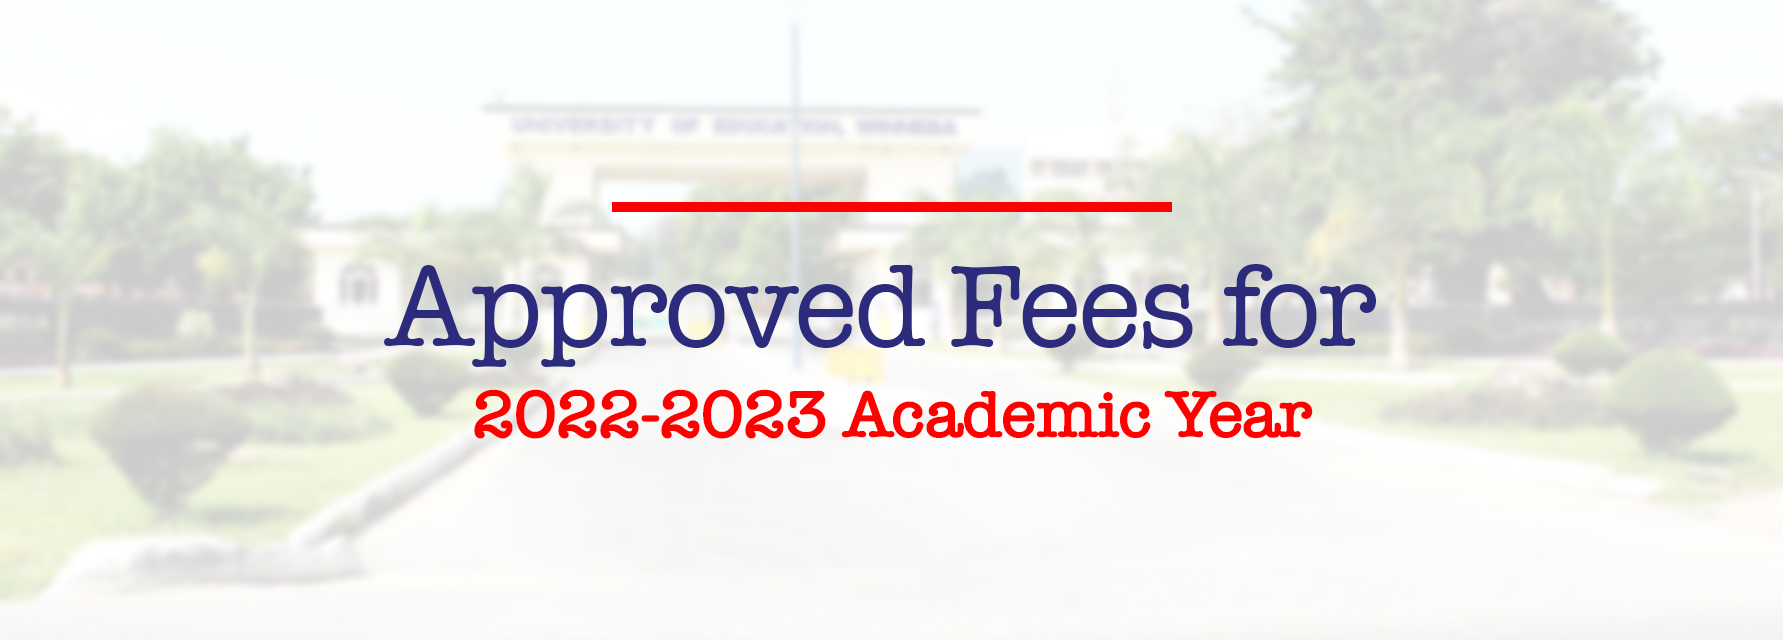 UEW Approved Fees